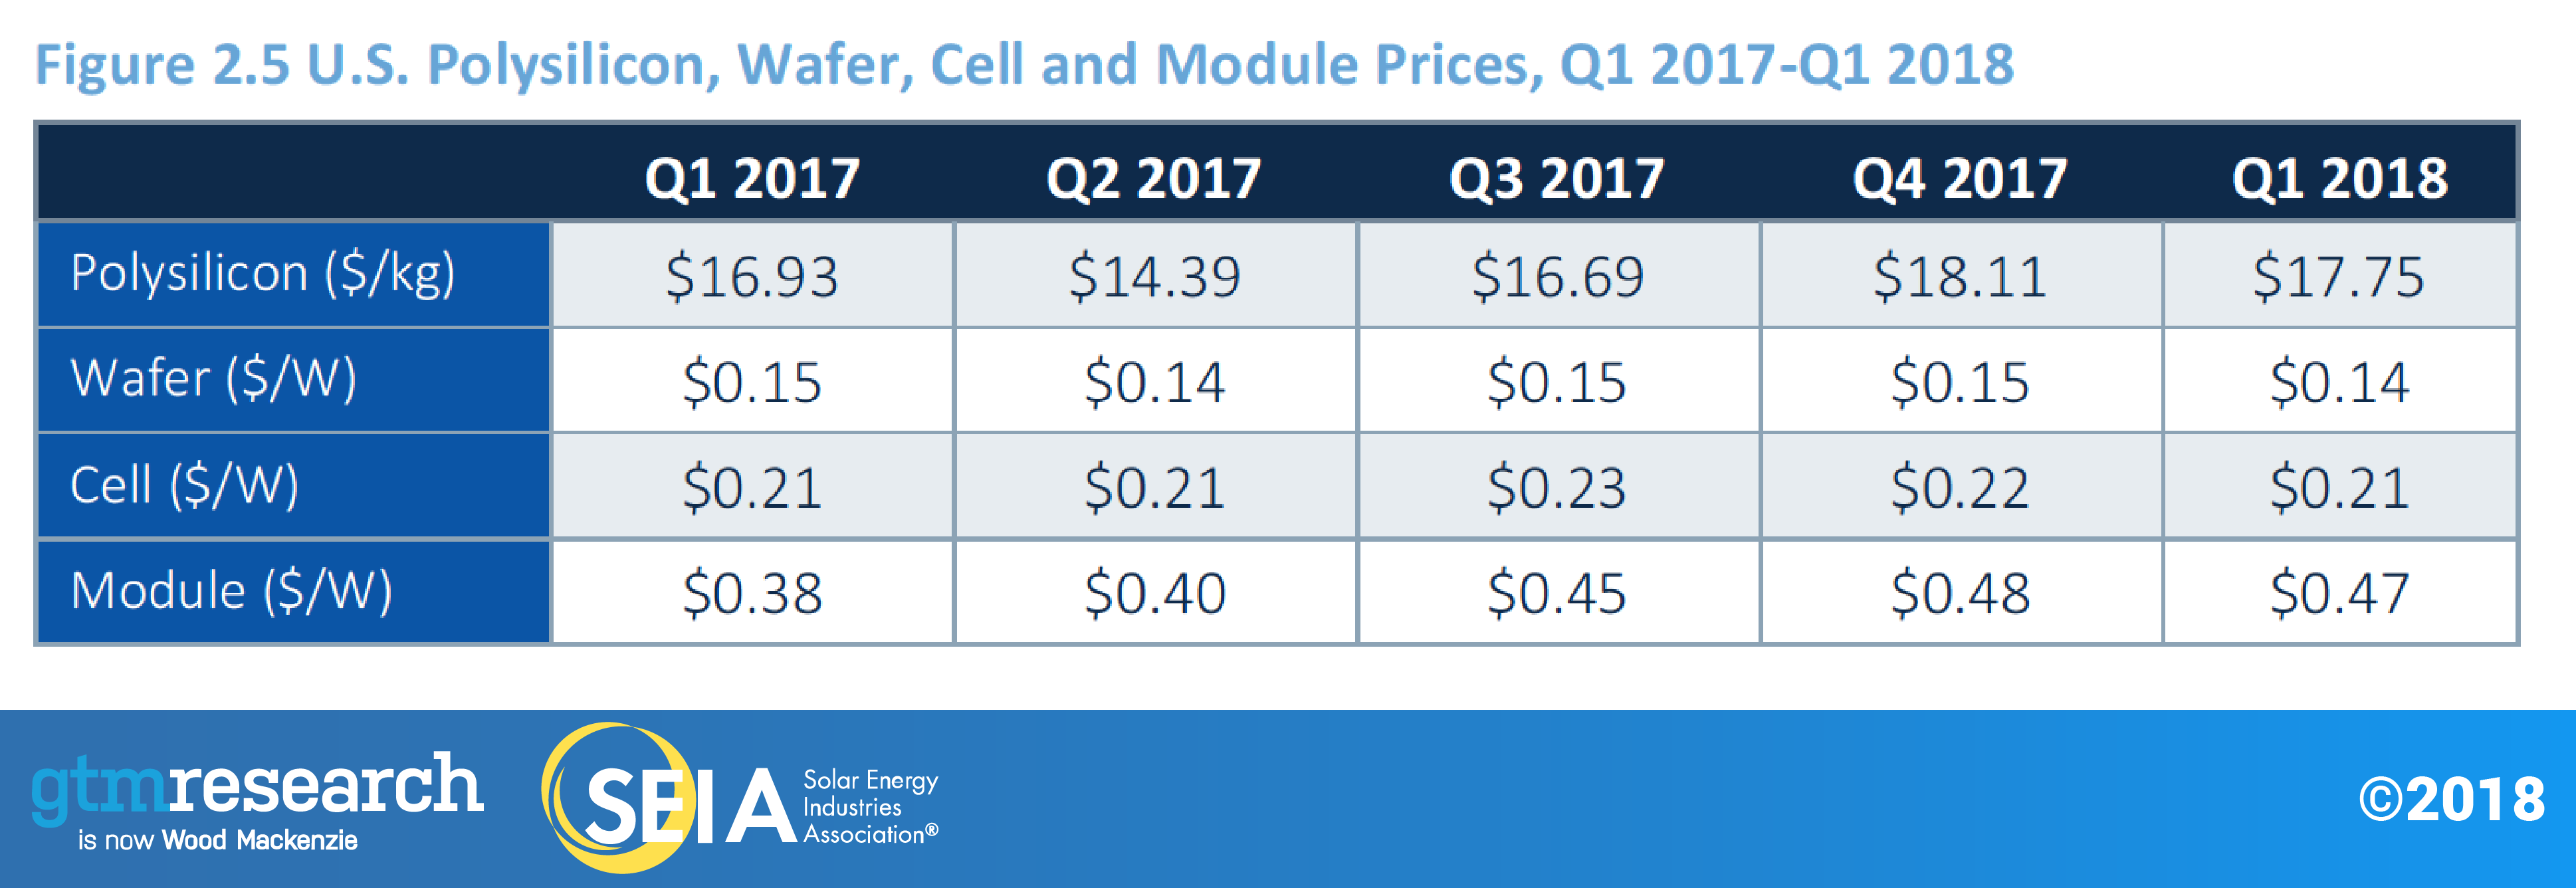 us-polysilicon-wafer-cell-module-prices-q12017-q12018